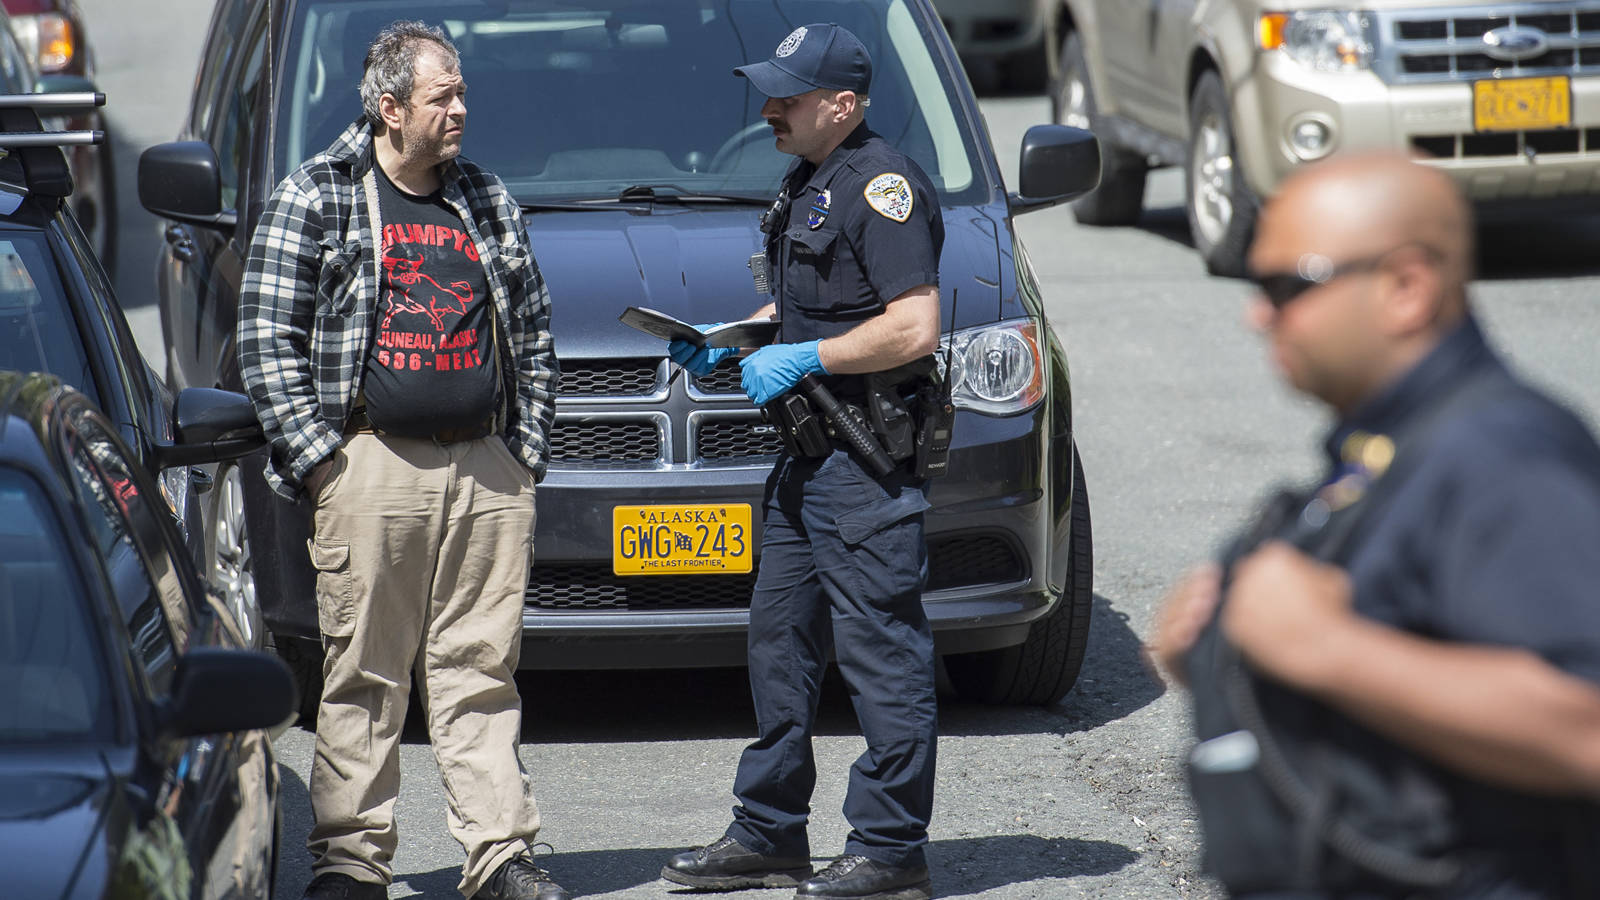 Juneau Police Department officers hold and question James Barrett and at least 10 other people during a raid at his house on 4th and Harris Streets on Wednesday, May 16, 2018. (Michael Penn | Juneau Empire)